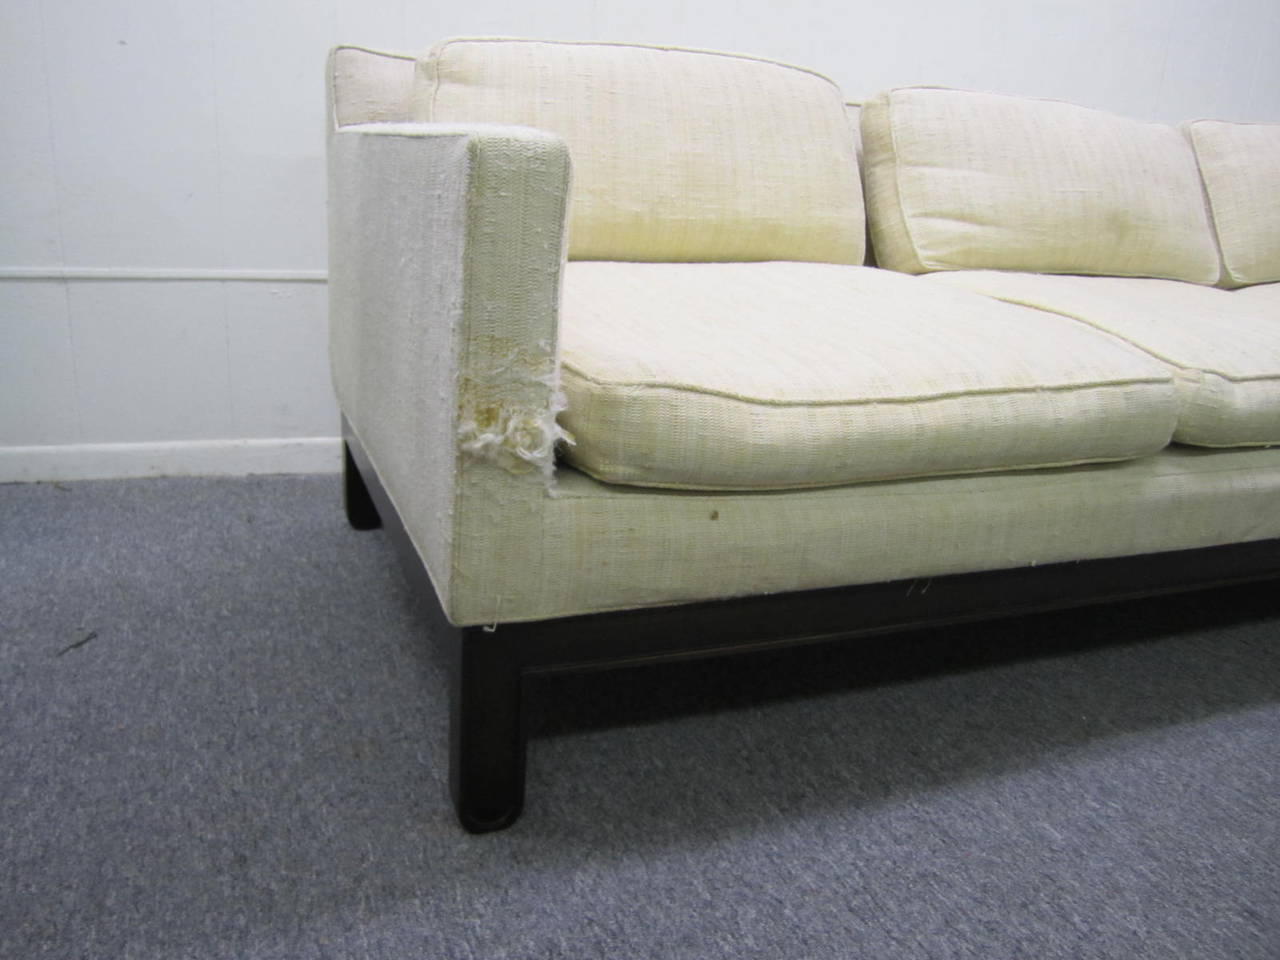 Very stylish Edward Wormley Dunbar sofa with fabulous solid walnut details . This sofa has bold interesting legs that are rounded at the feet. Reupholstery is recommended sofa fabric is in poor condition.  The substantial walnut base is in very nice